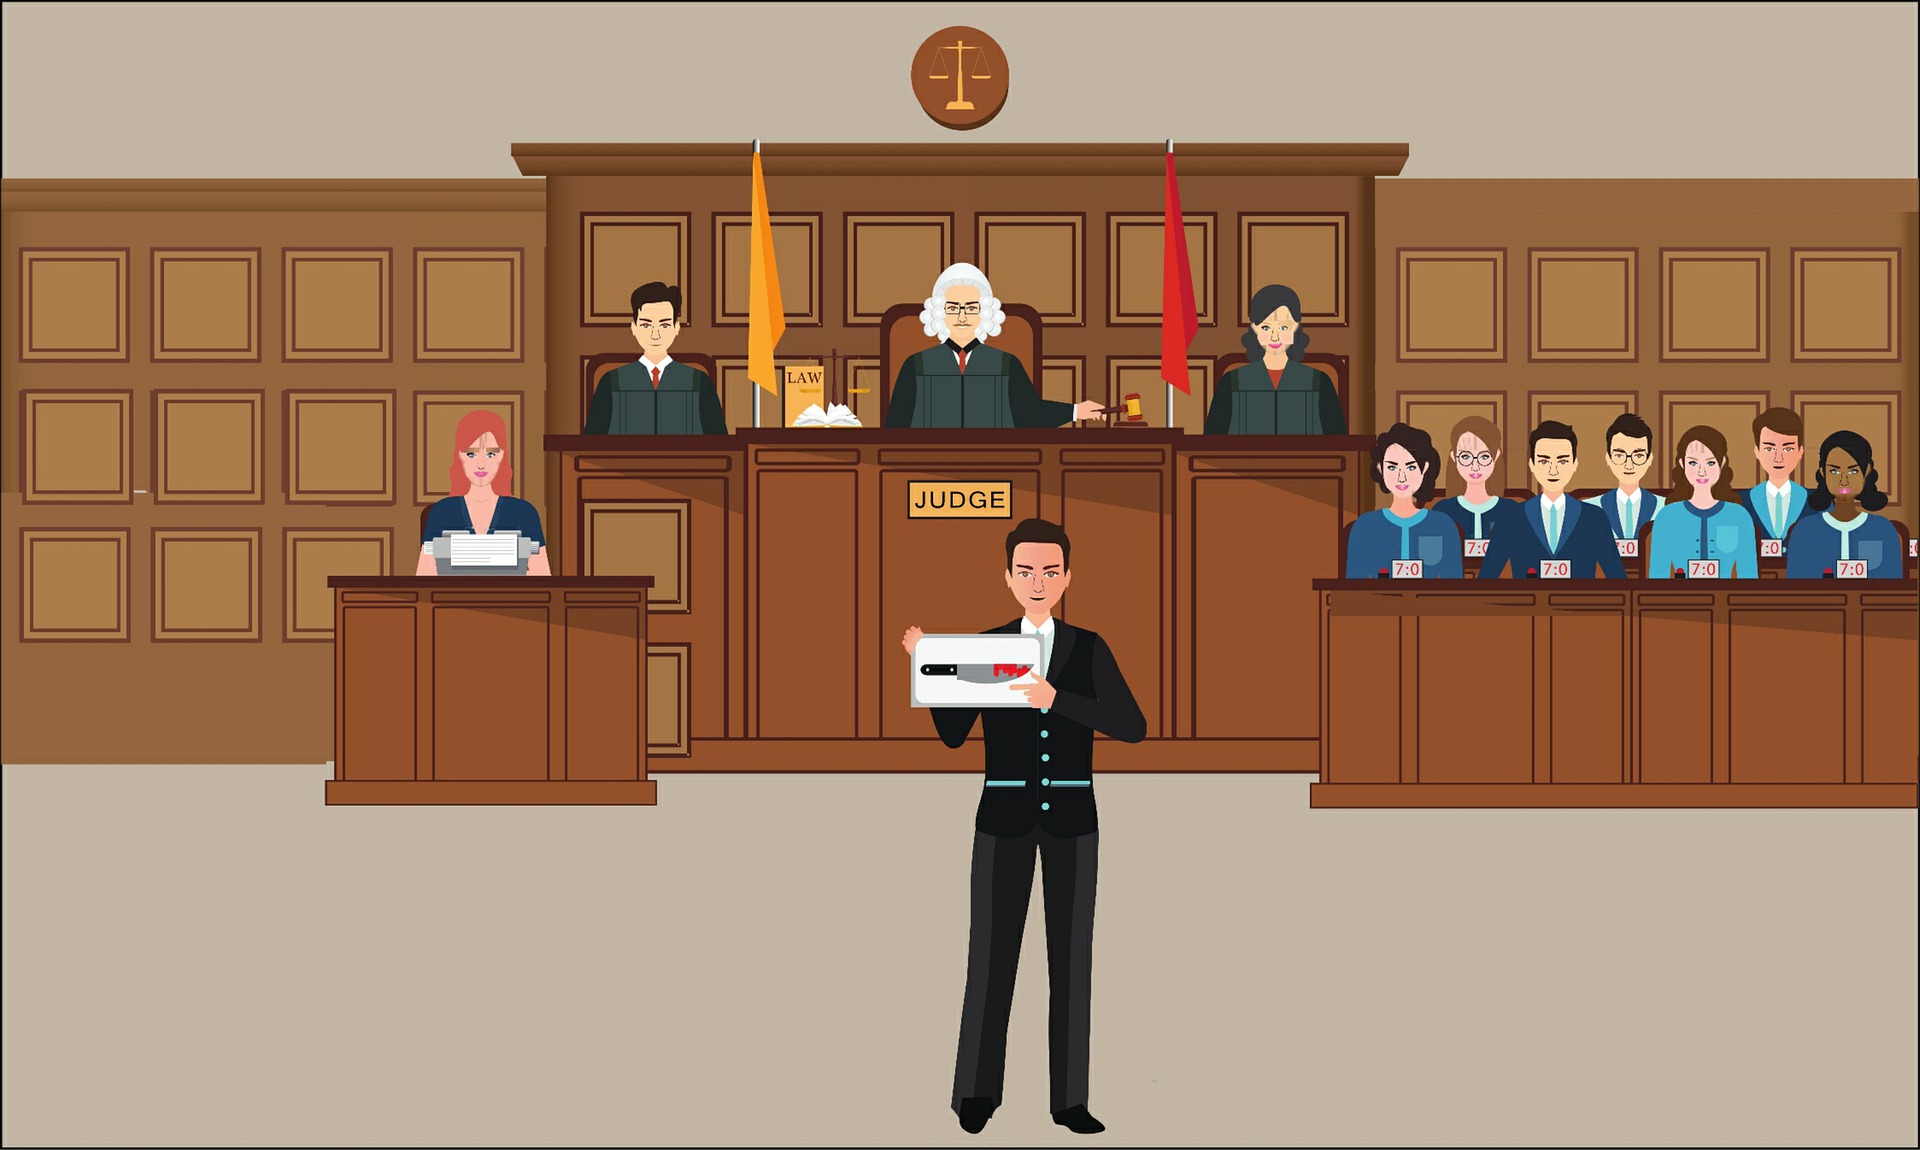 shows jury in a courtroom in a criminal case